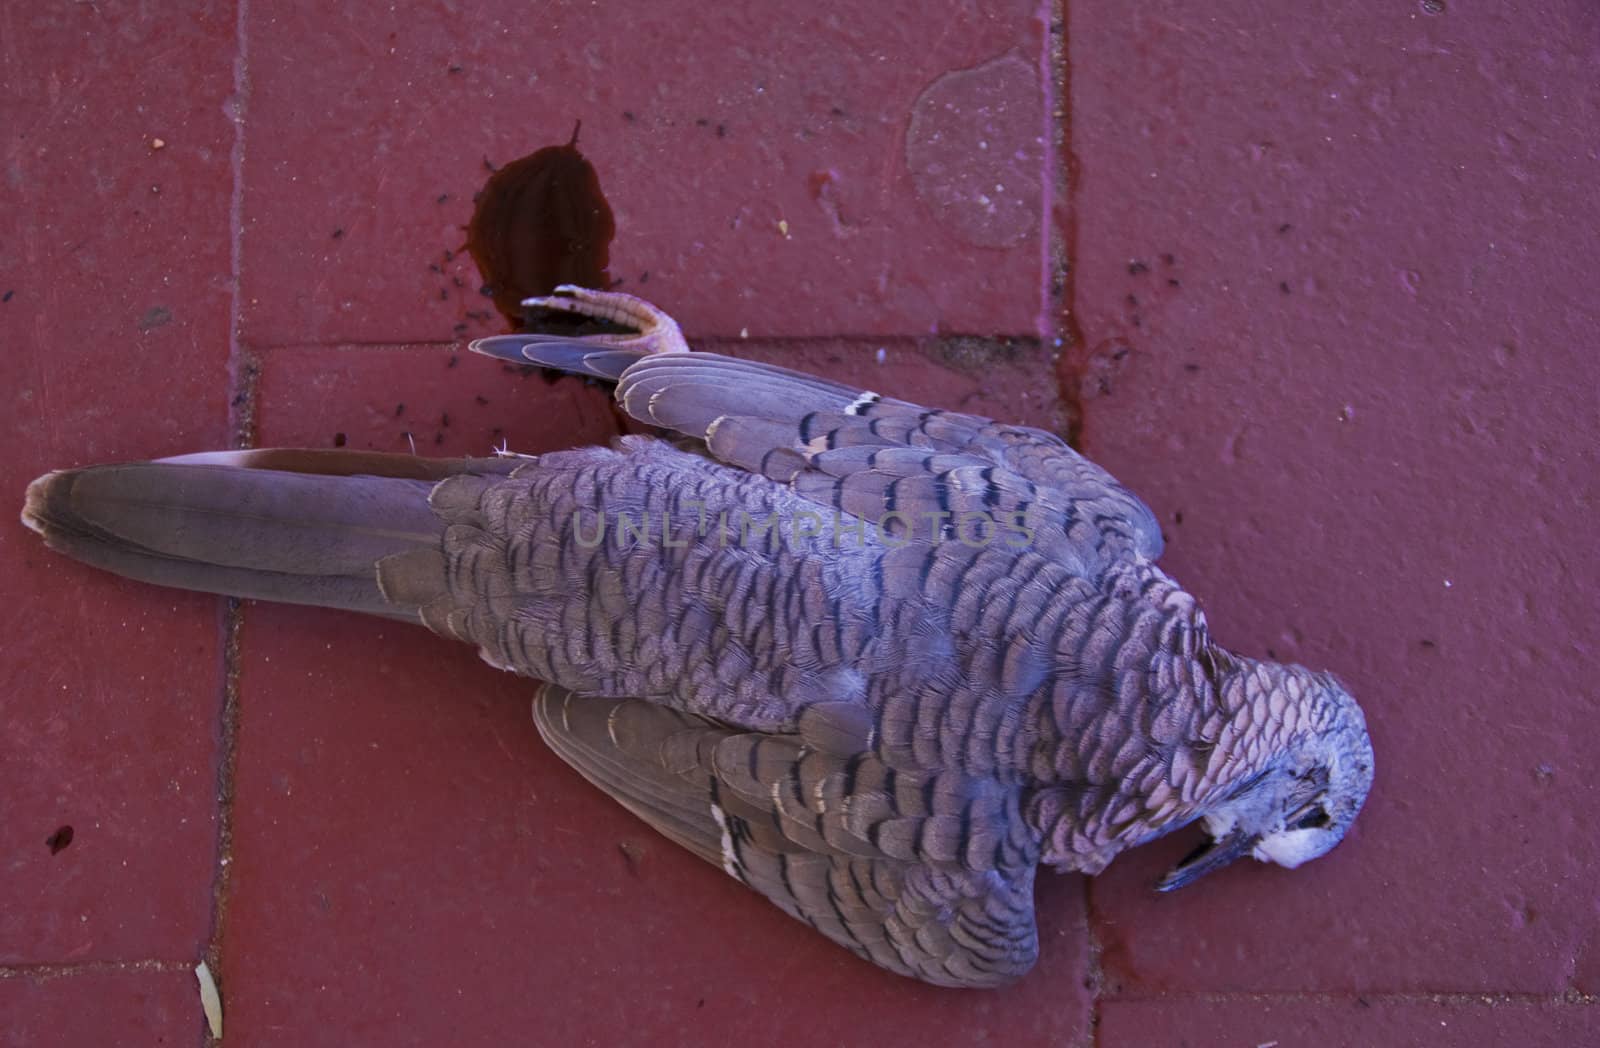 A bird of prey killed the pigeon but lost her in flight. The pigeon fell on red tile, and continued bleeding.